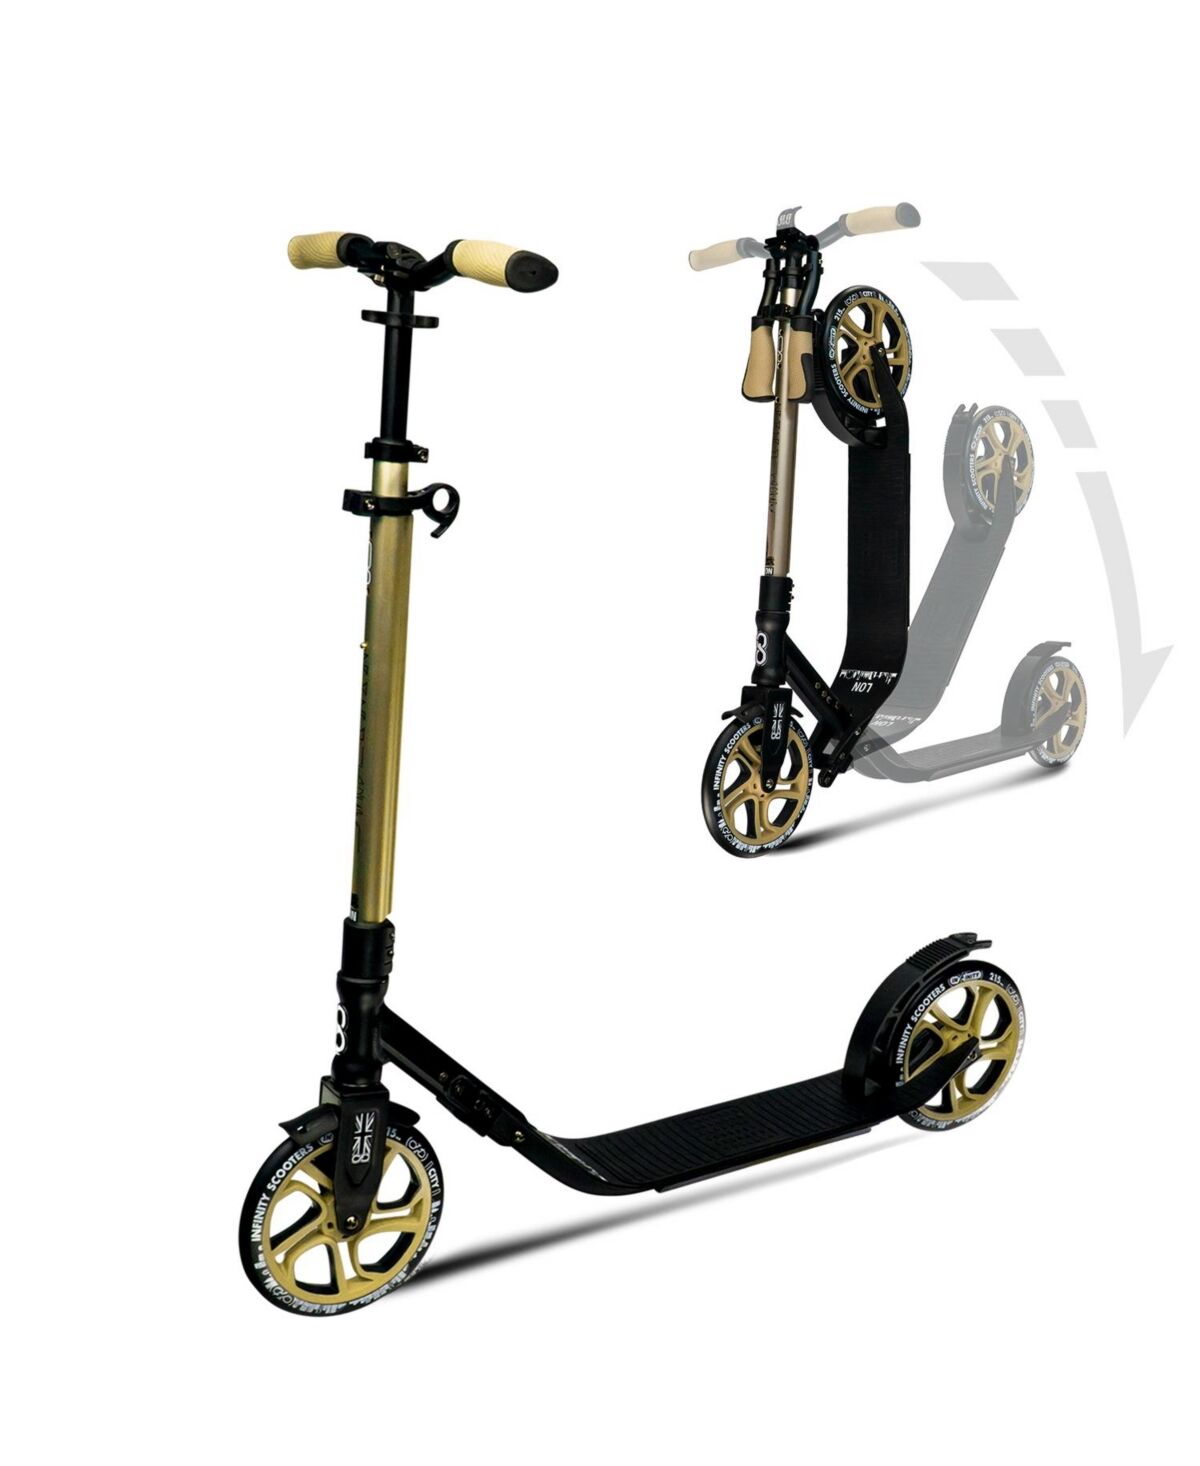 Crazy Skates London Foldable Kick Scooter - Great Scooters For Teens And Adults - Gold